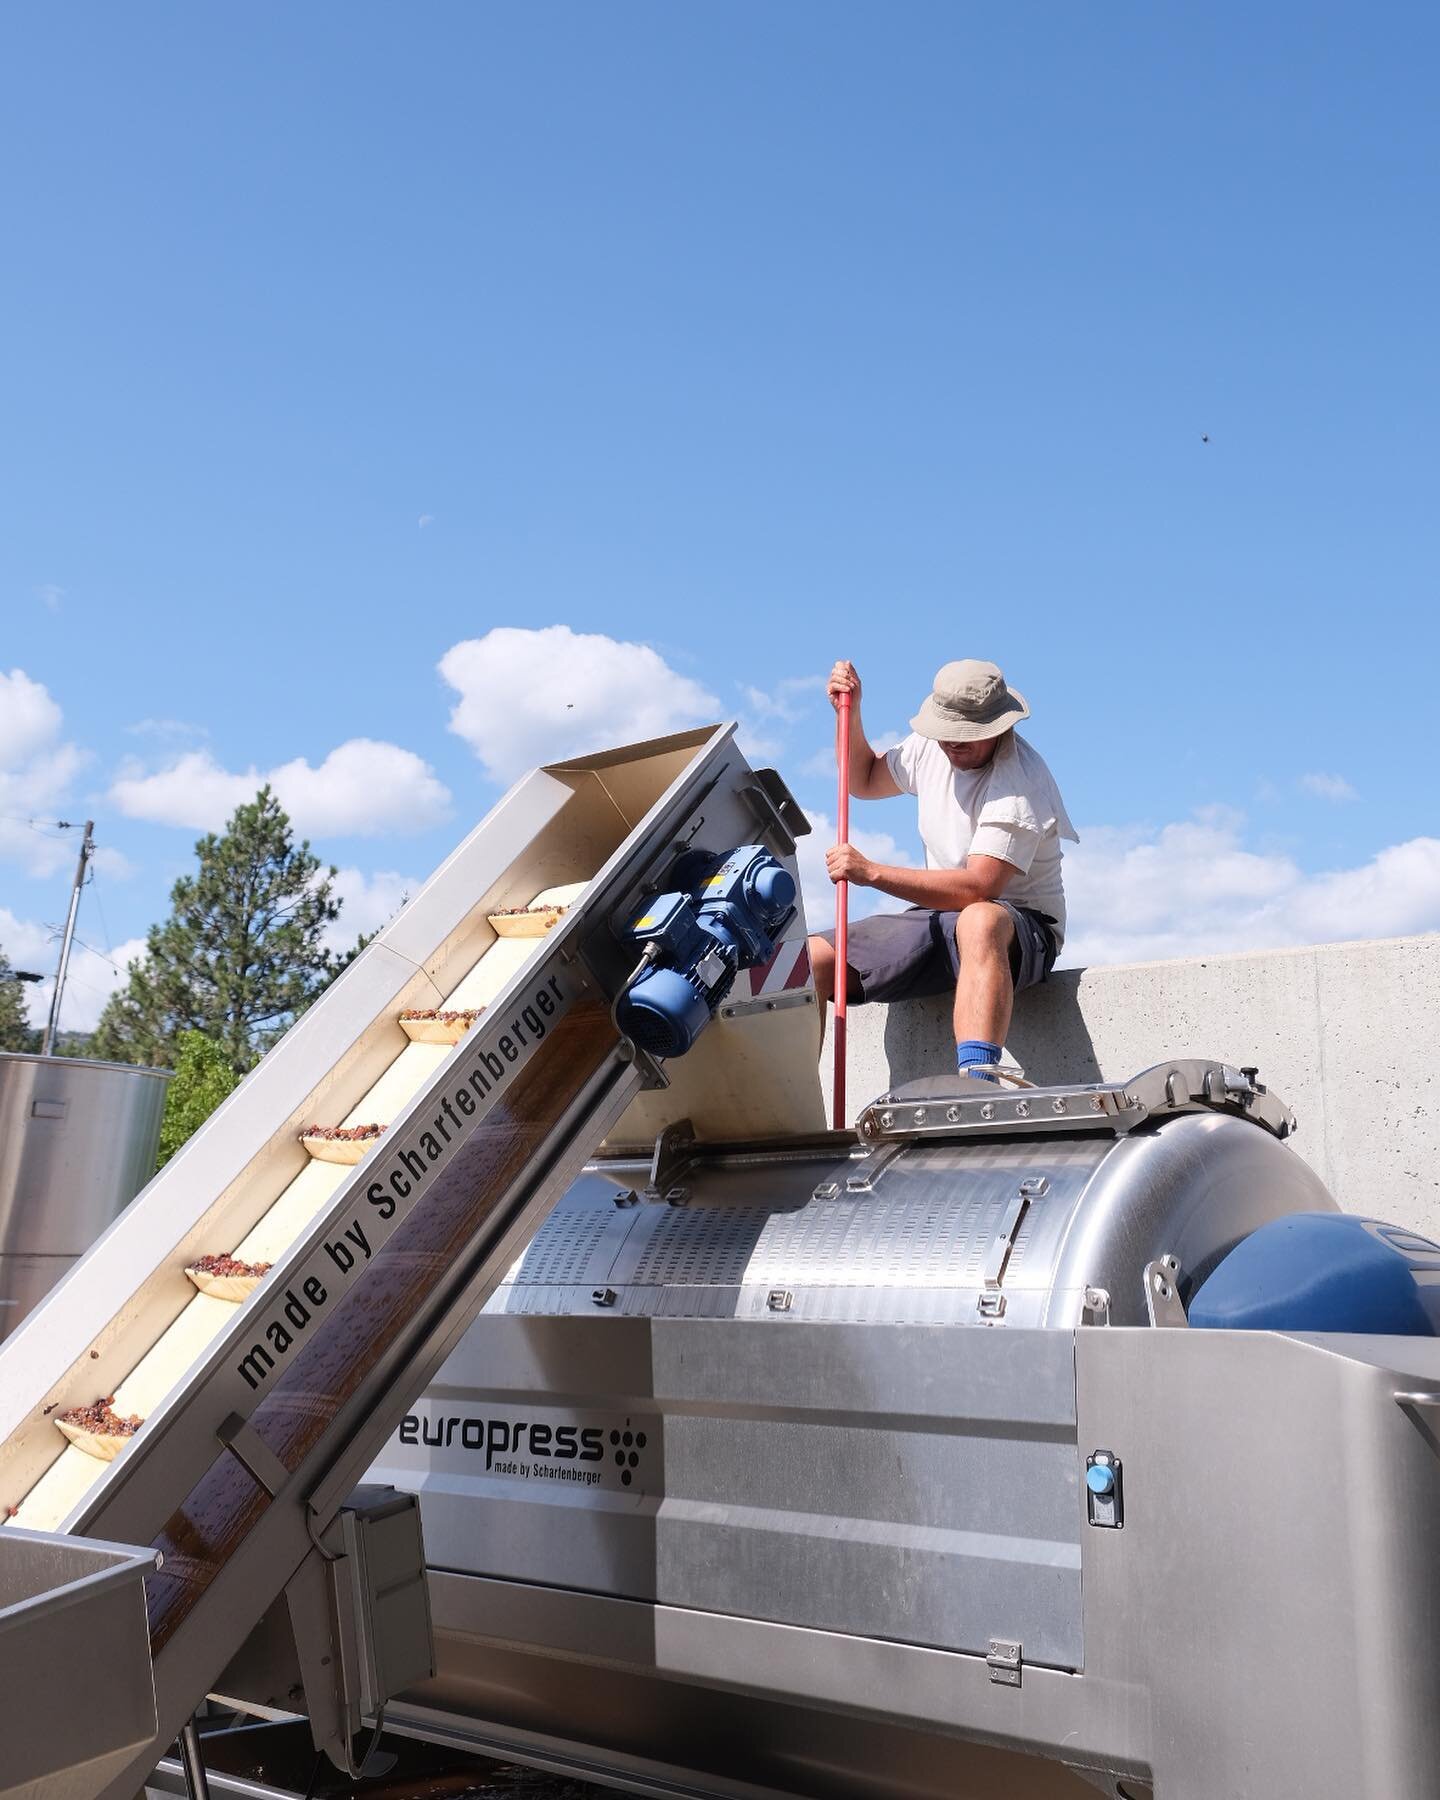 Nate at the top of the press raking in de-stemmed Pinot Gris 🍇 A moment from our 2023 harvest✨ 

#naturalwine 
#wine 
#pinotgris 
#harvest2023 
#bcwine 
#winemakers 
#winemaking 
#canadianwine 
#bcnaturalwine 
#summerlandbc